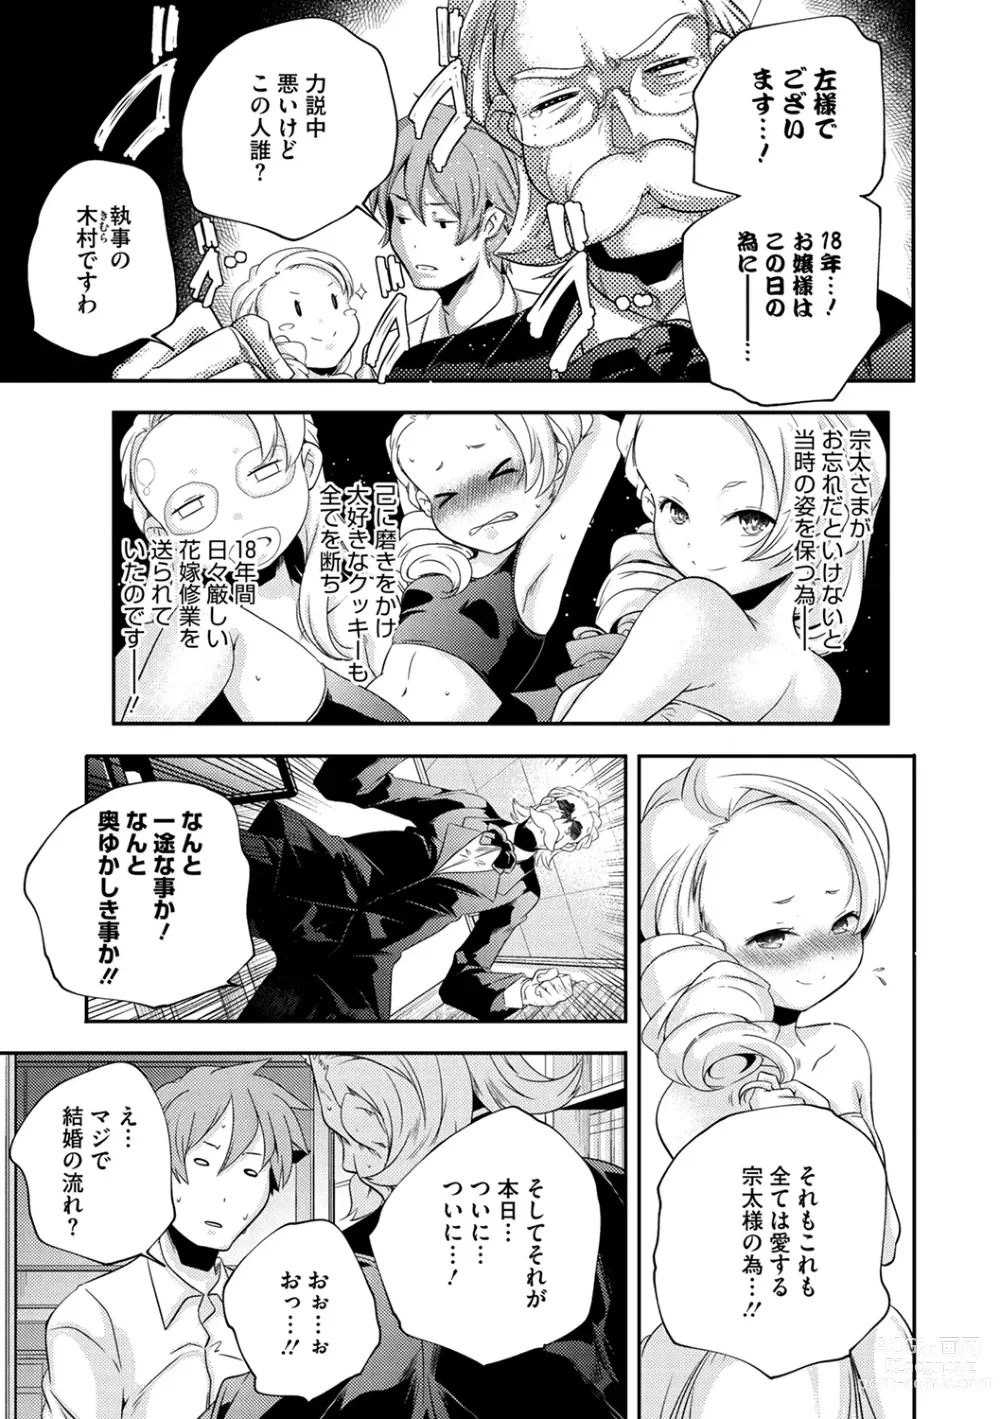 Page 25 of manga LQ -Little Queen- Vol. 52